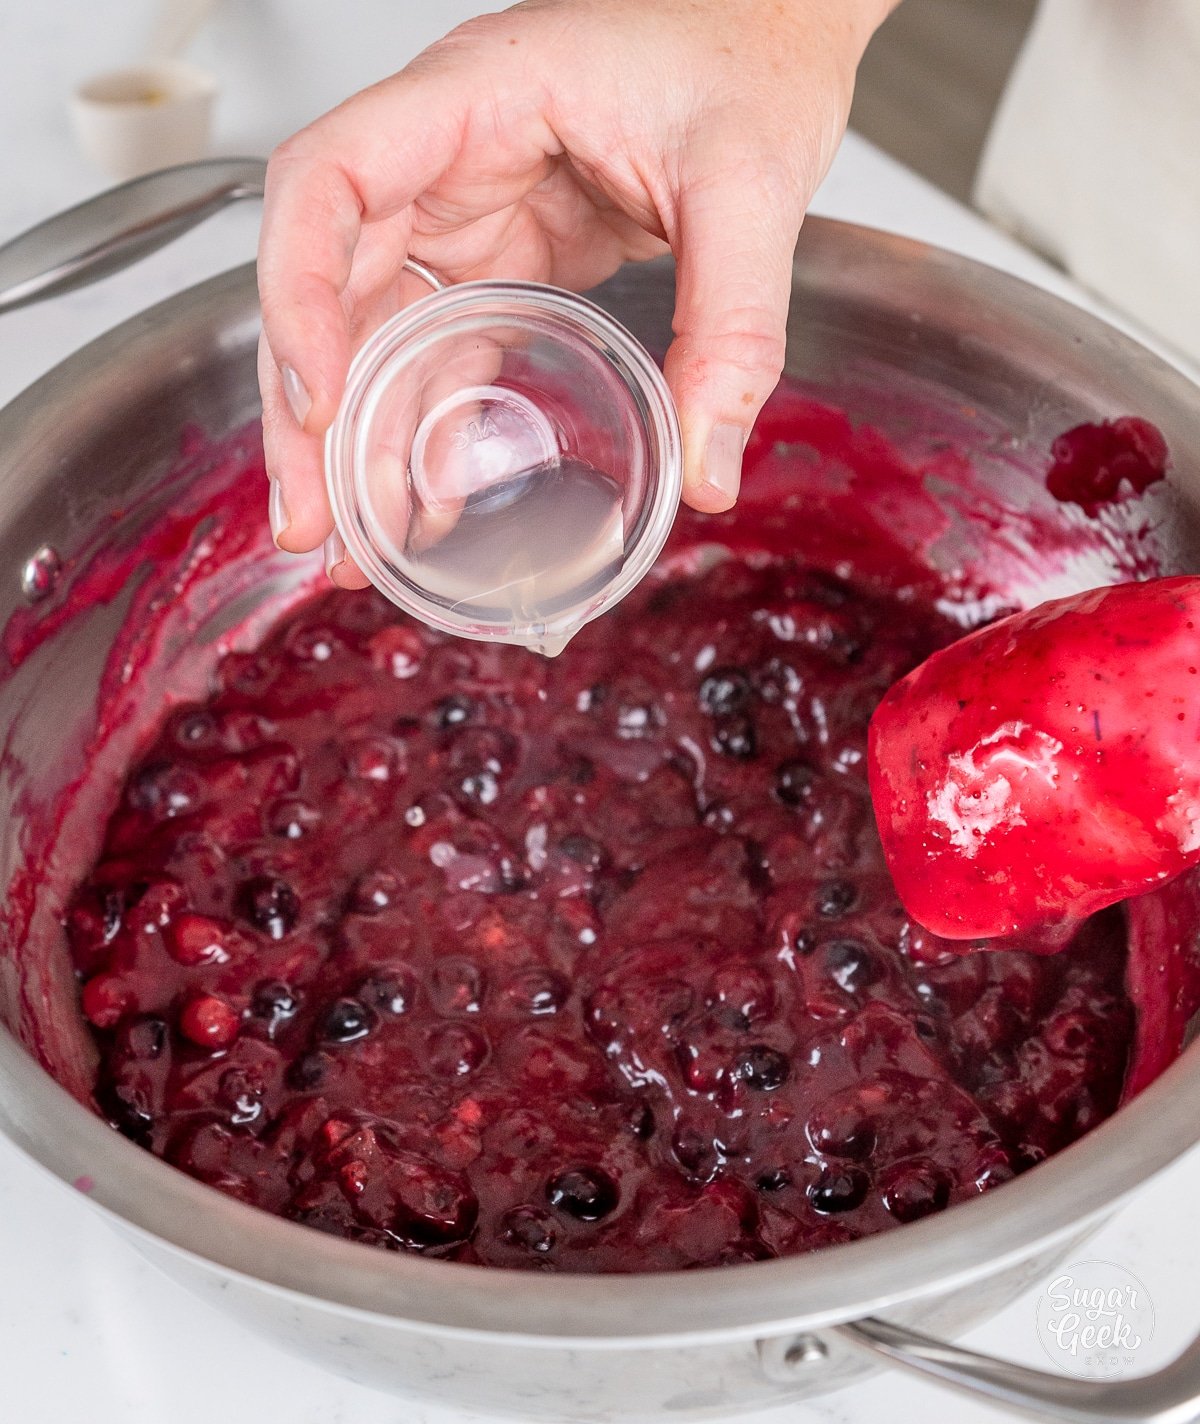 hand adding lemon juice to cooking blueberry pie filling.